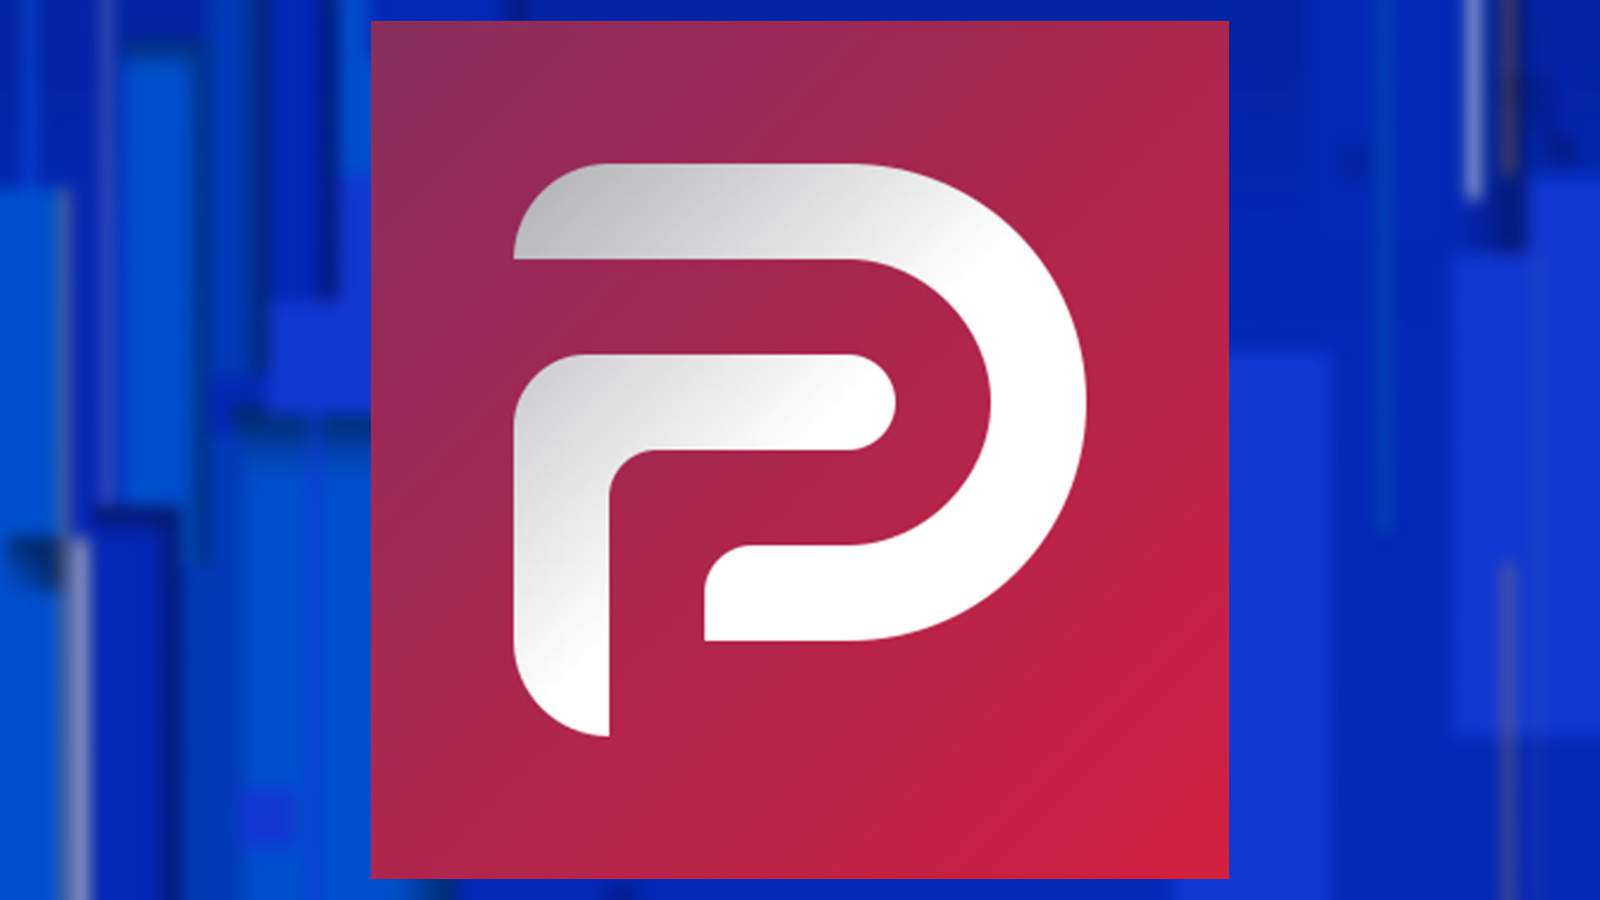 What is Parler and why are some people leaving Facebook to join it?